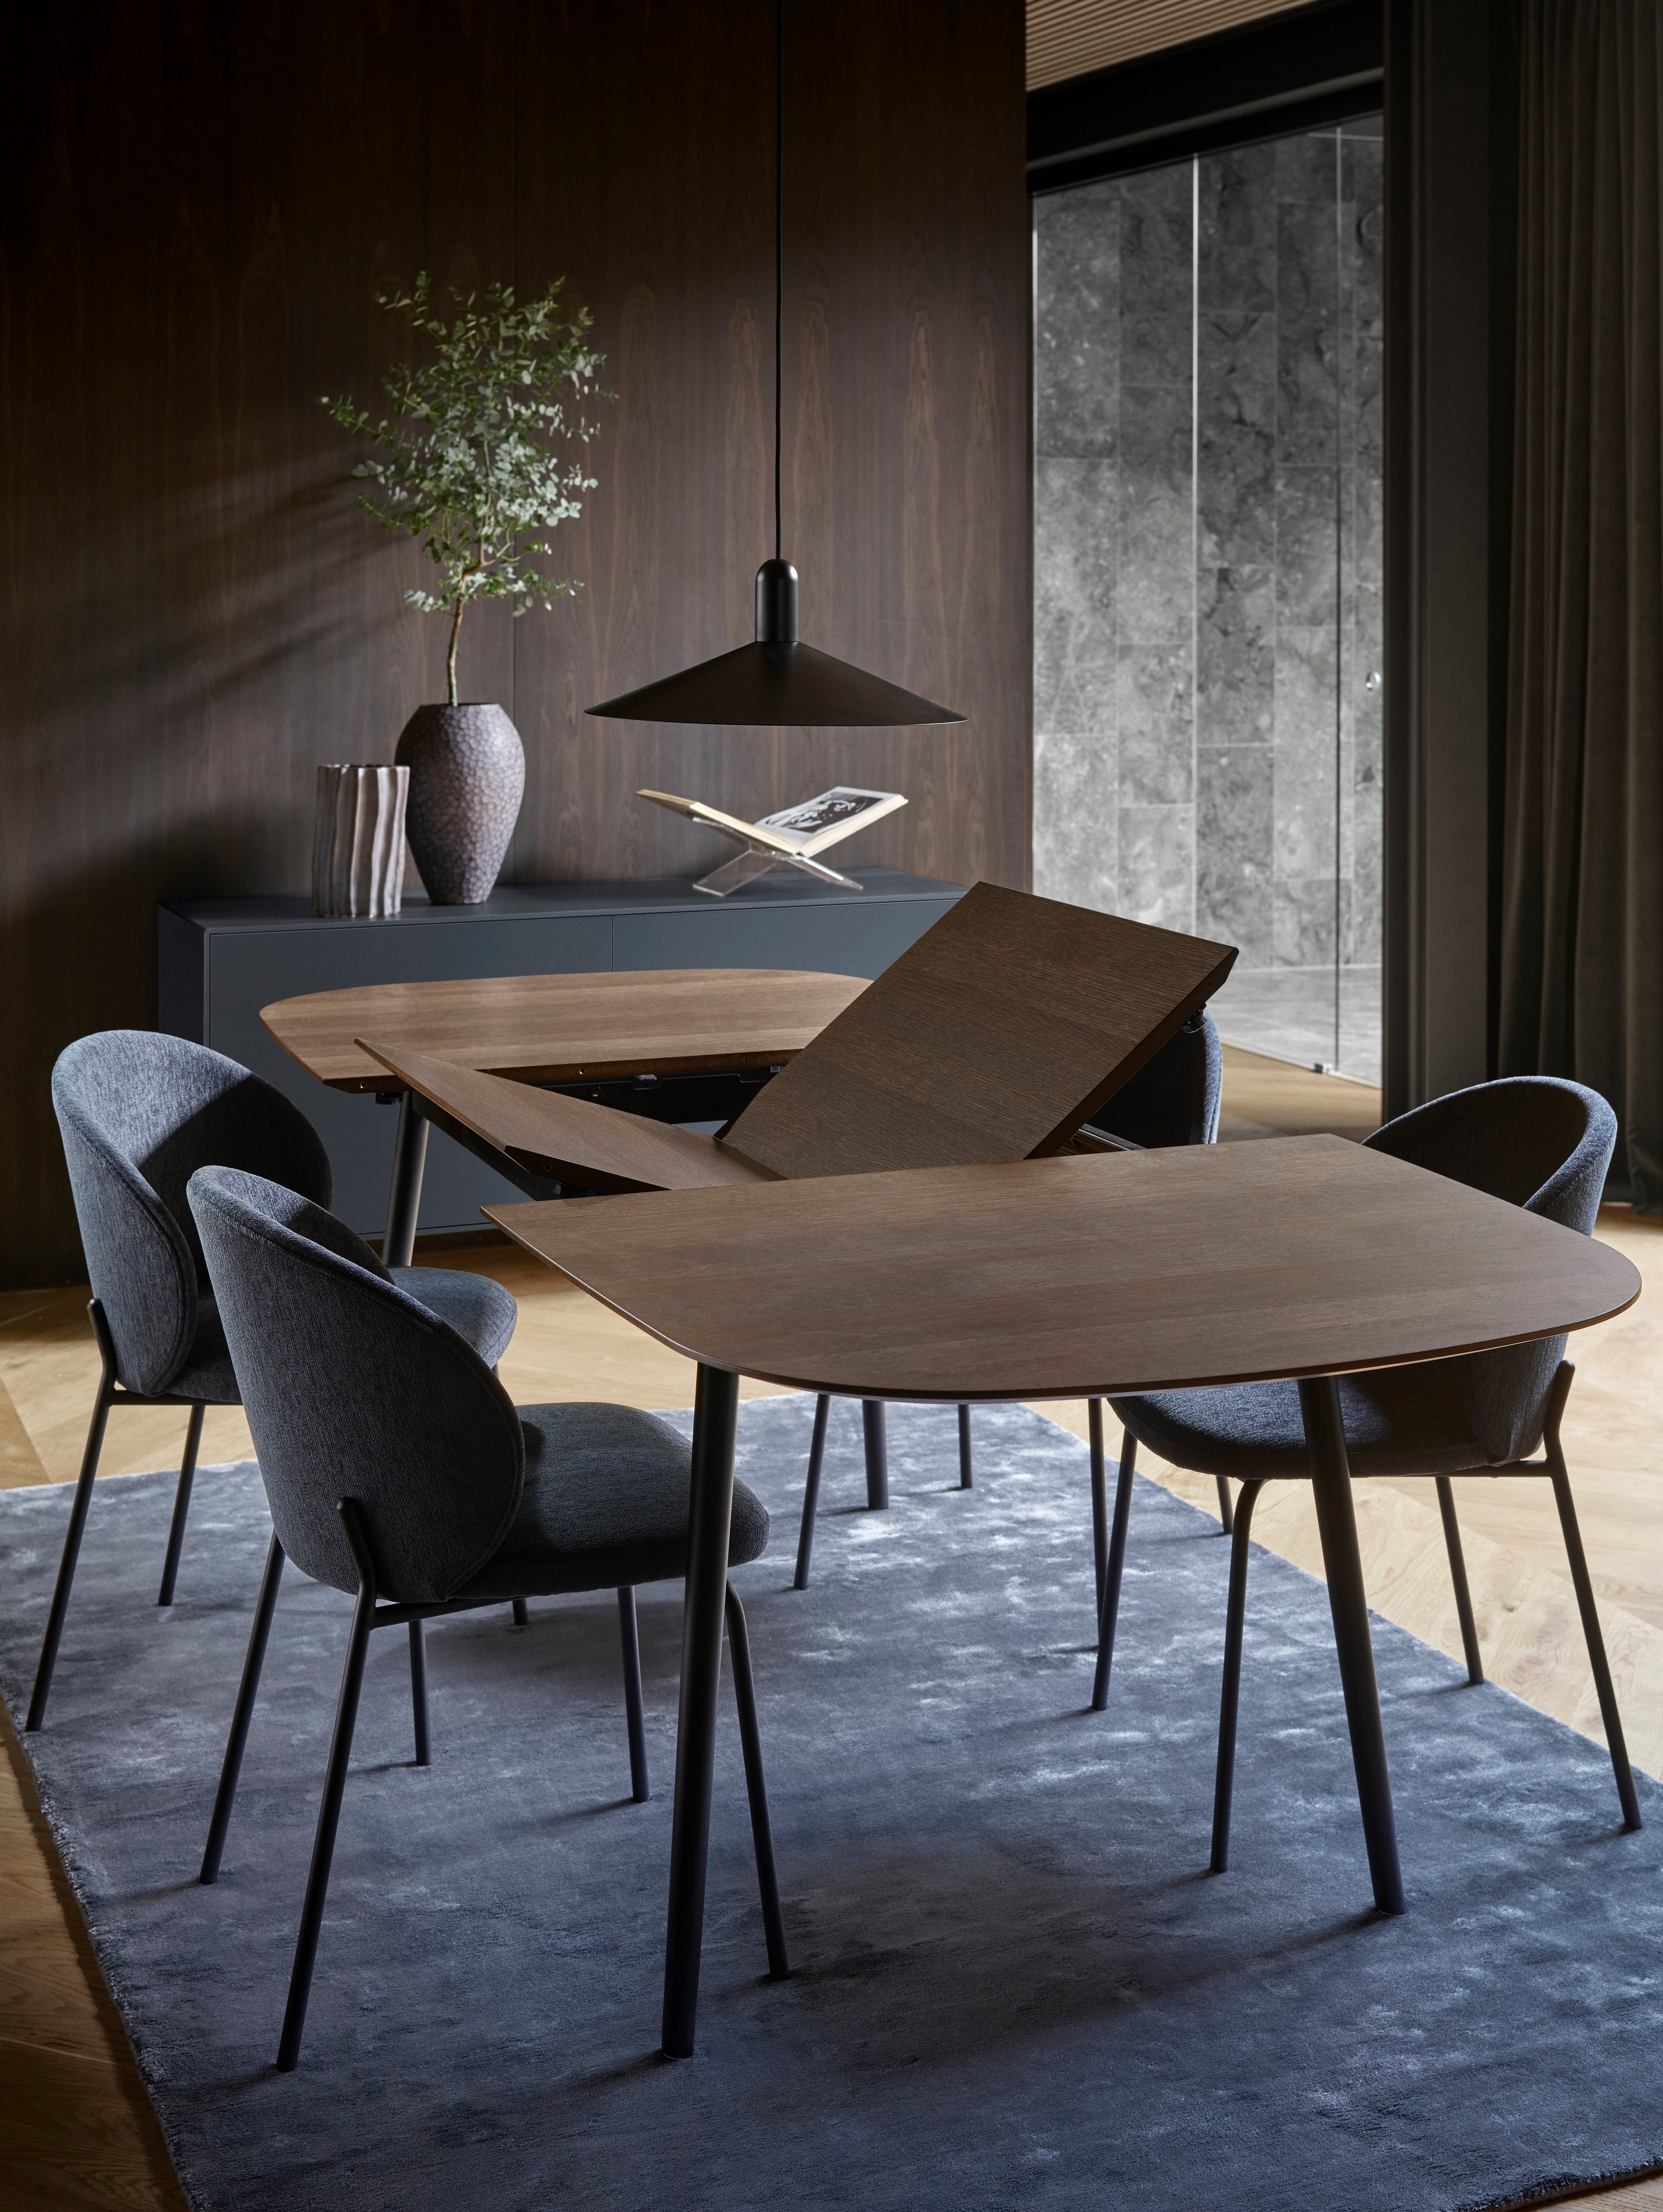 Contemporary dining room with extendable table, dark chairs, pendant light and vase with greenery